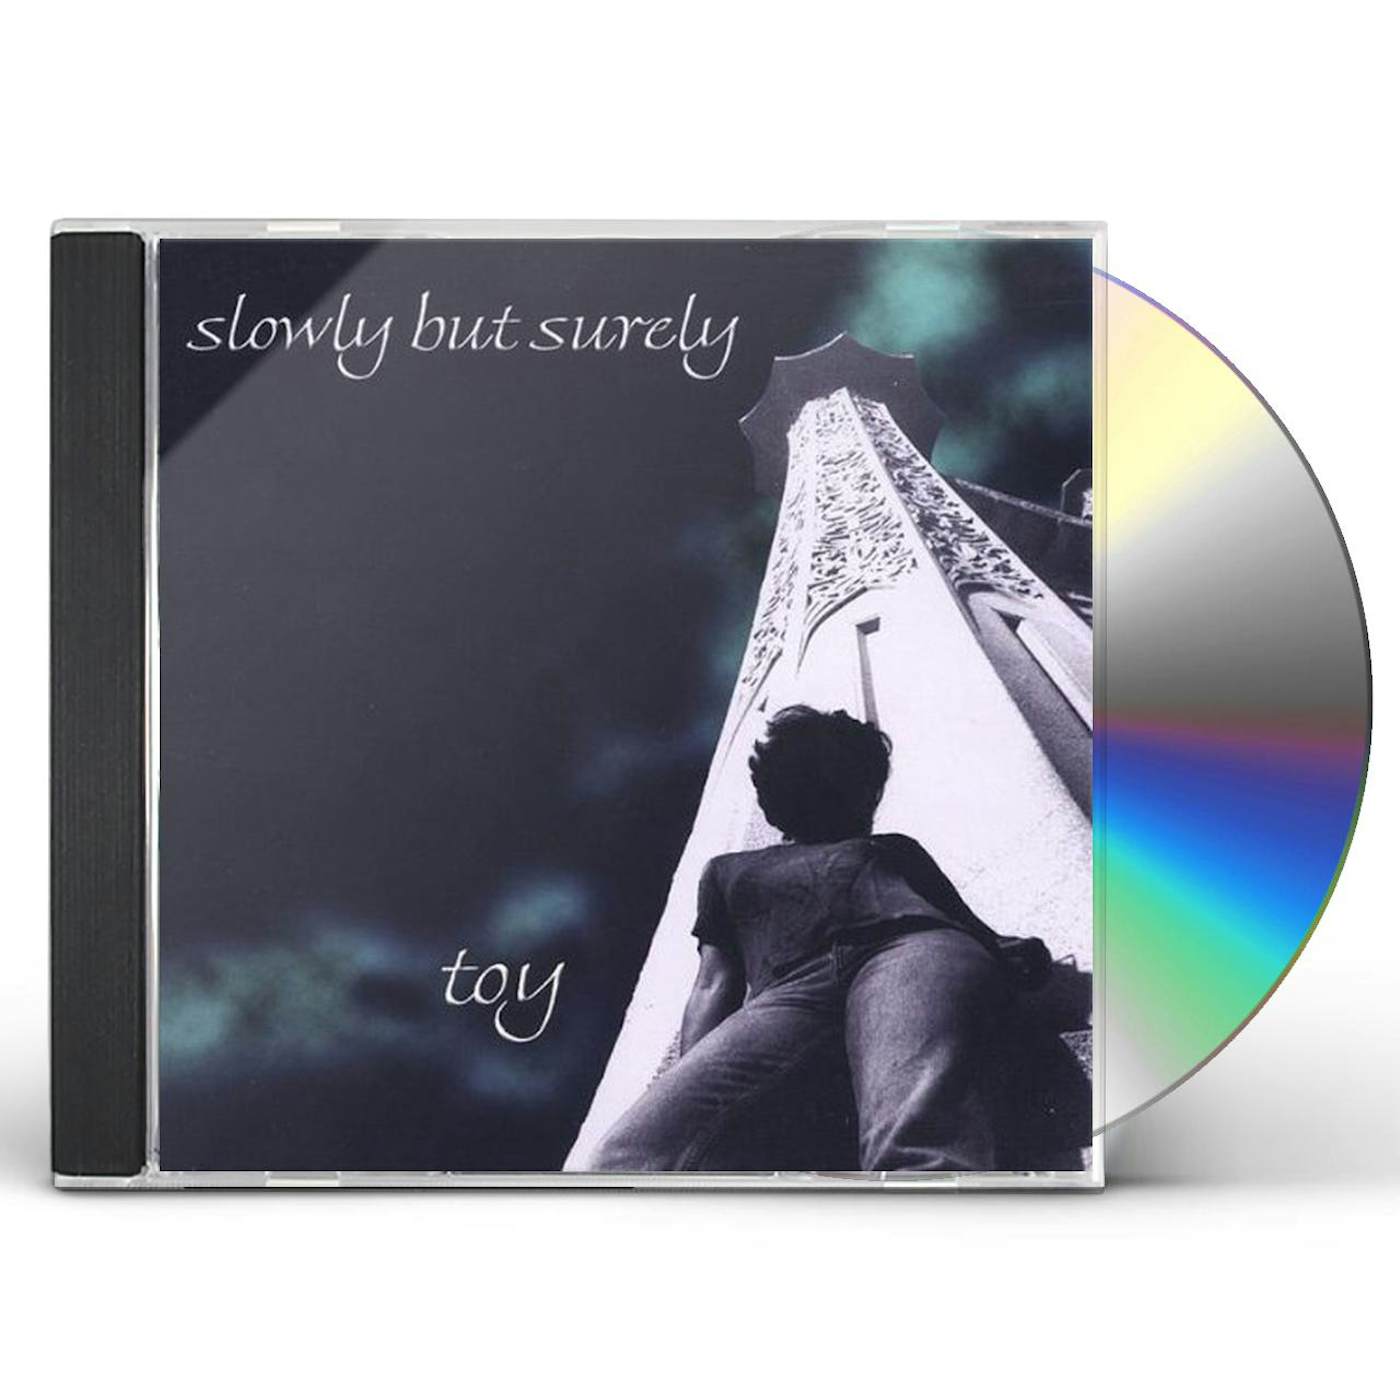 TOY SLOWLY BUT SURELY CD